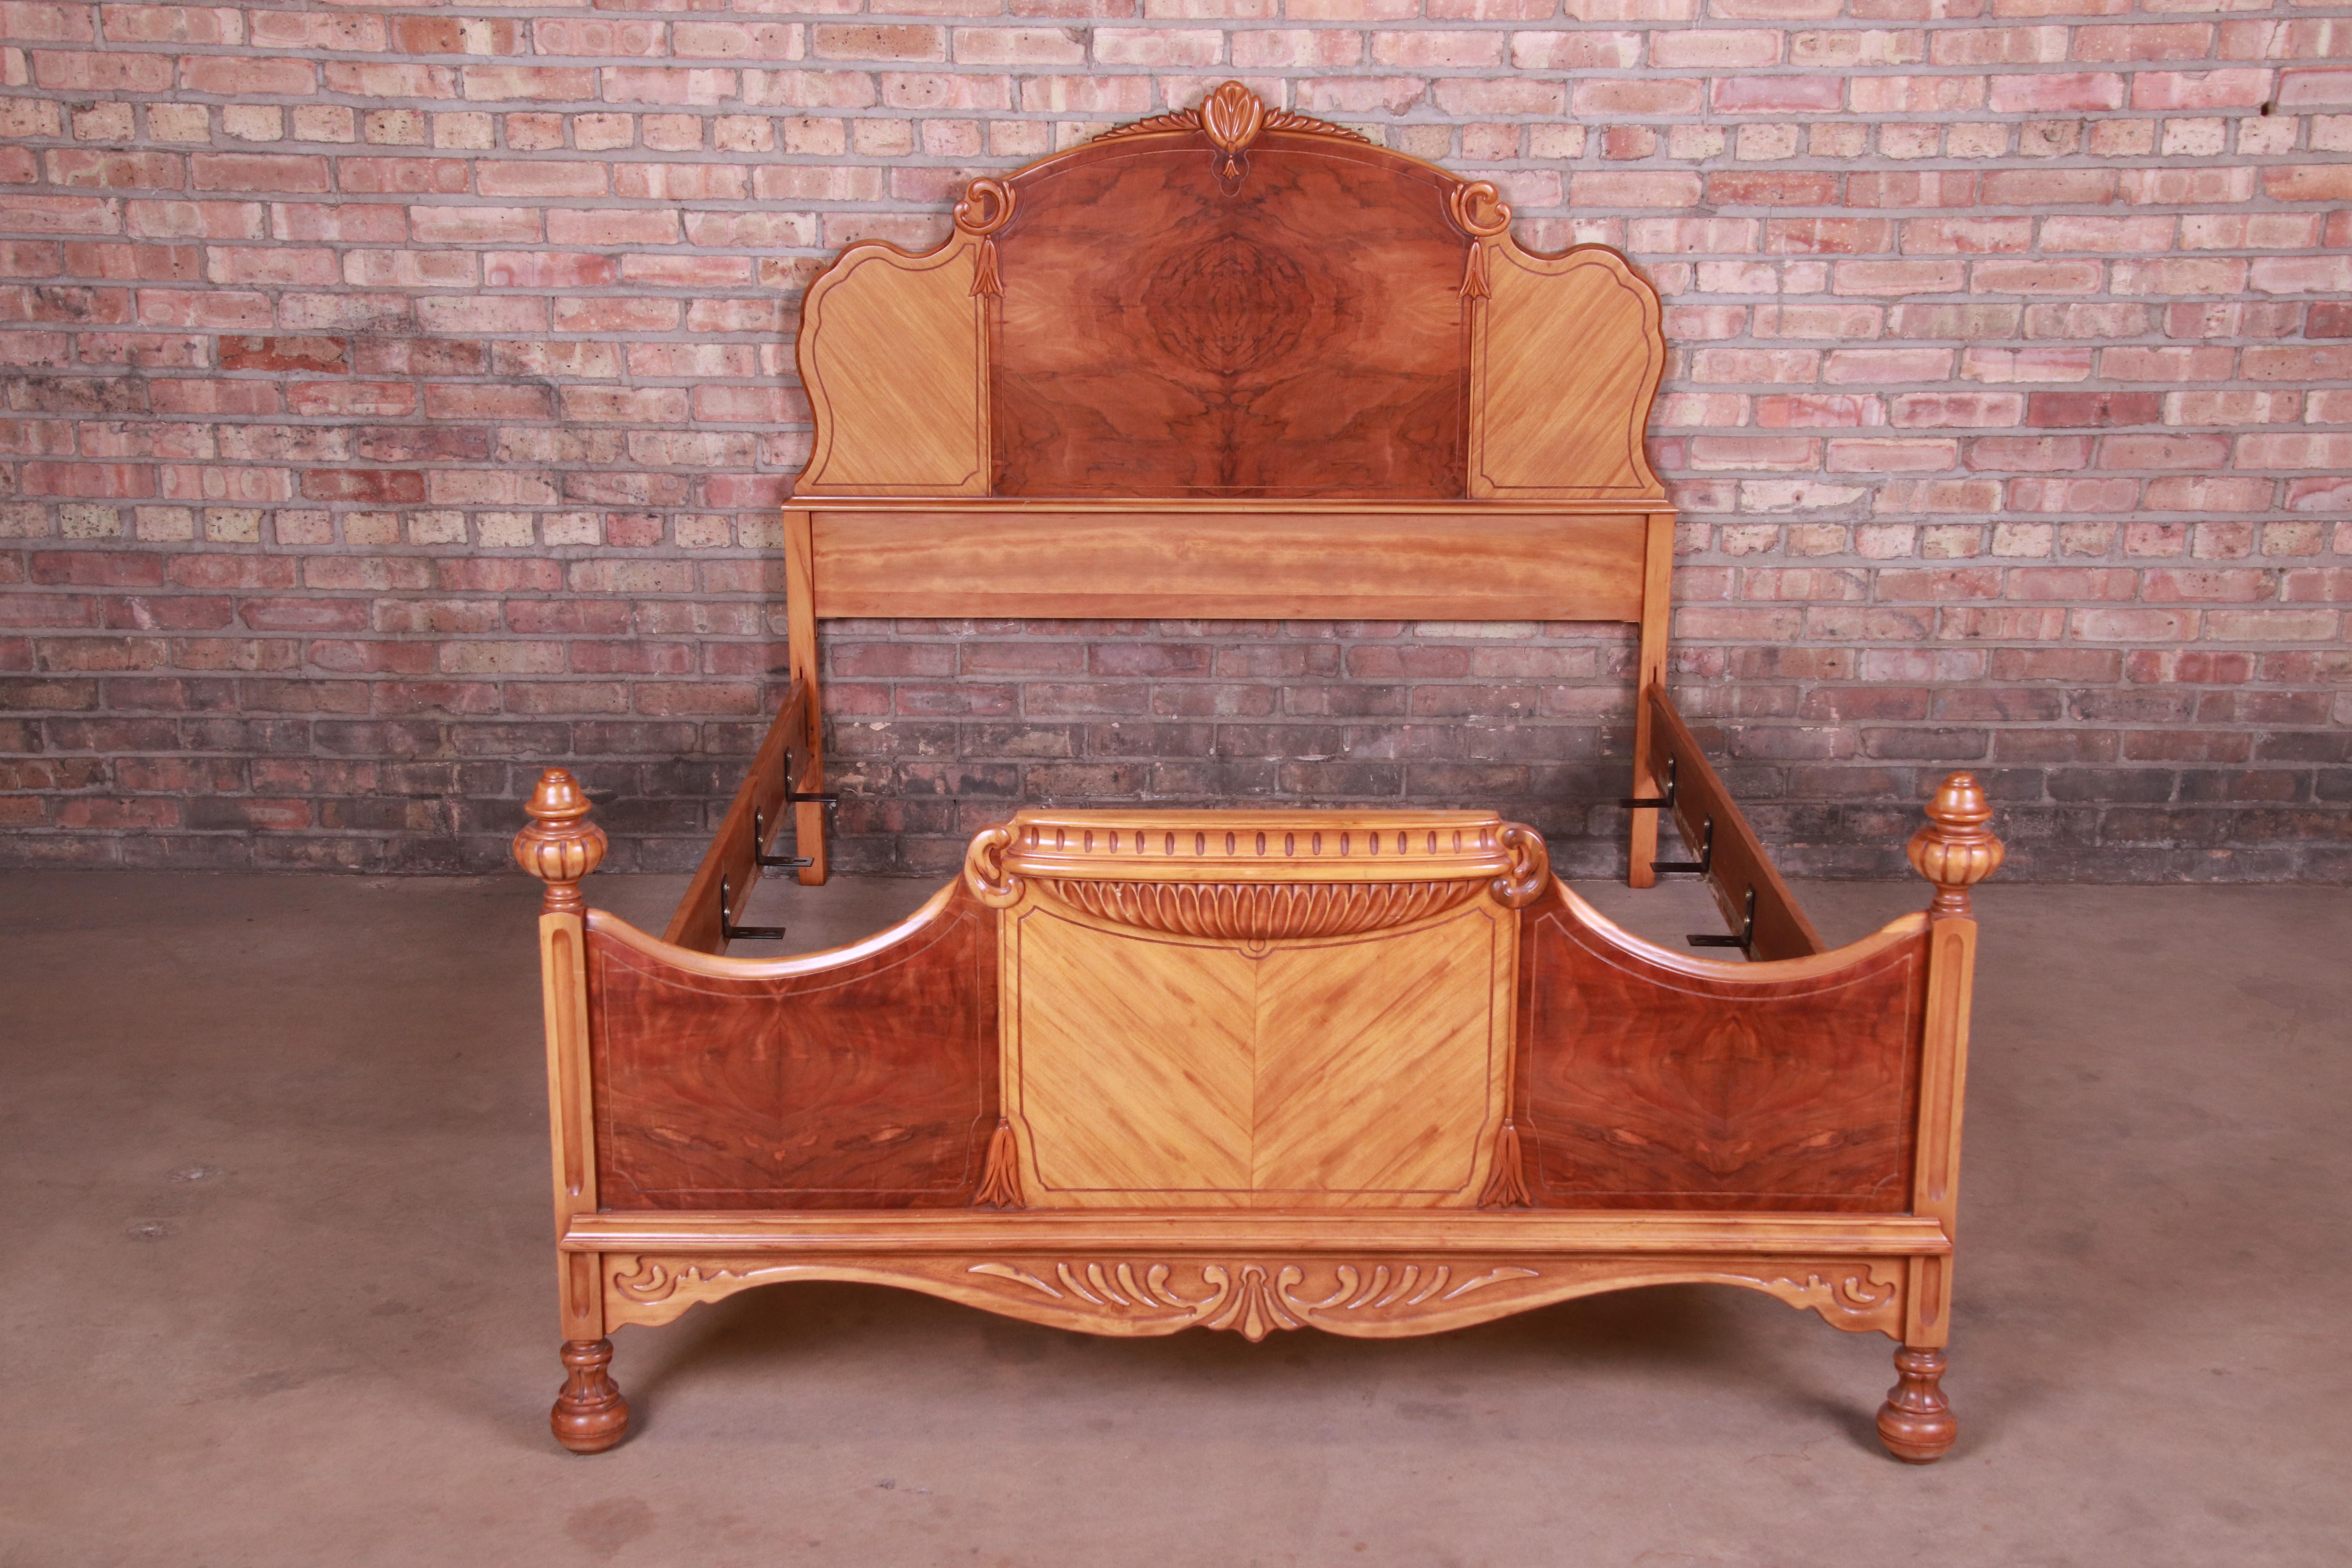 A gorgeous French Art Deco style full size bed frame,

circa 1930s

Burled walnut, with carved and inlaid satinwood.

Measures: 58